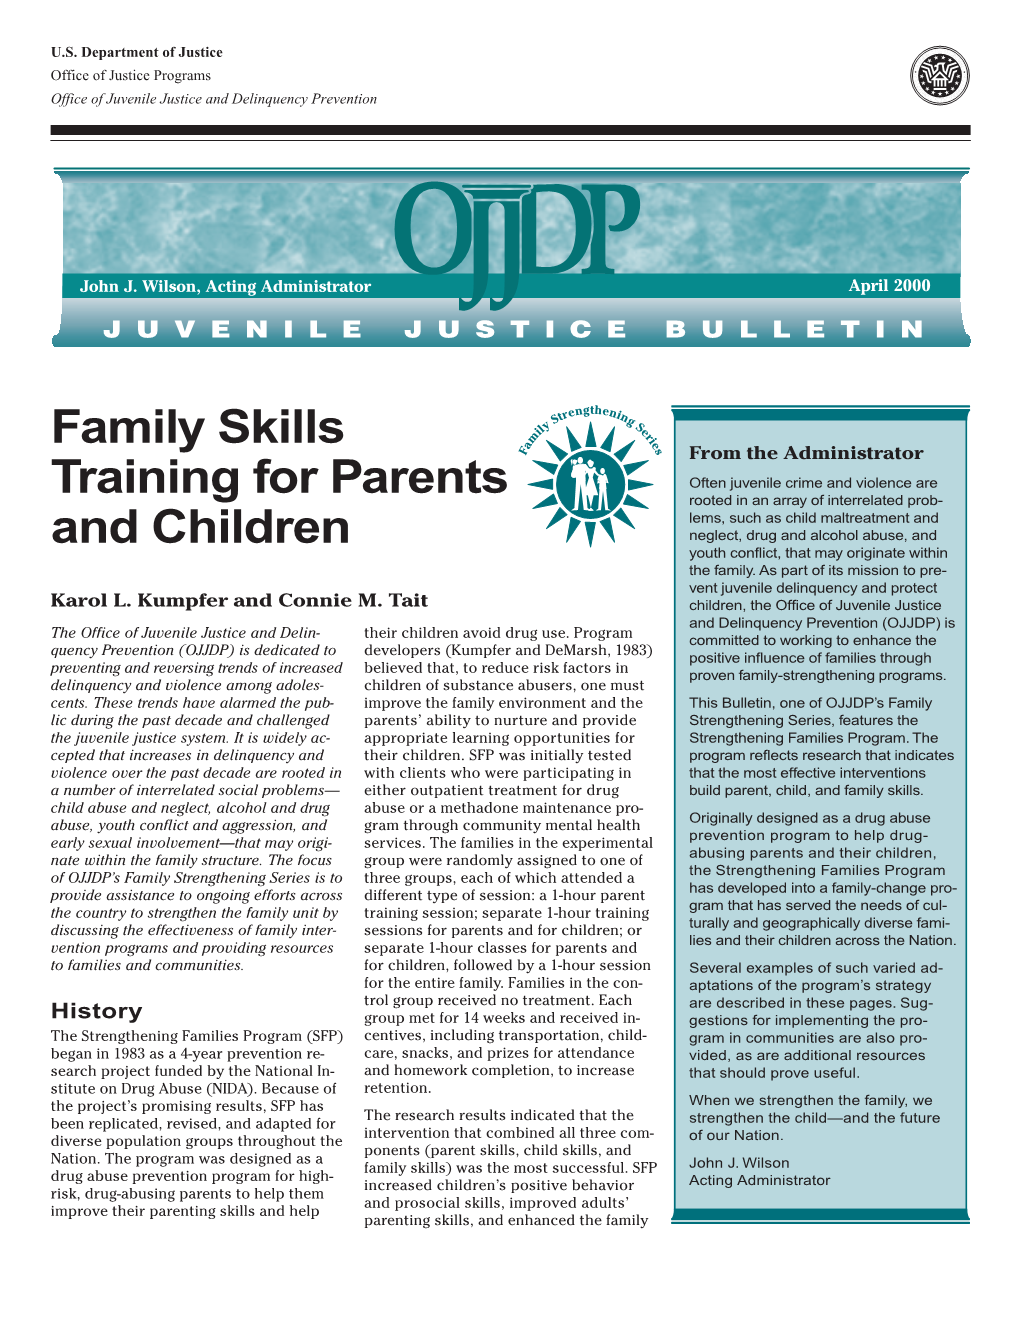 Family Skills Training for Parents and Children